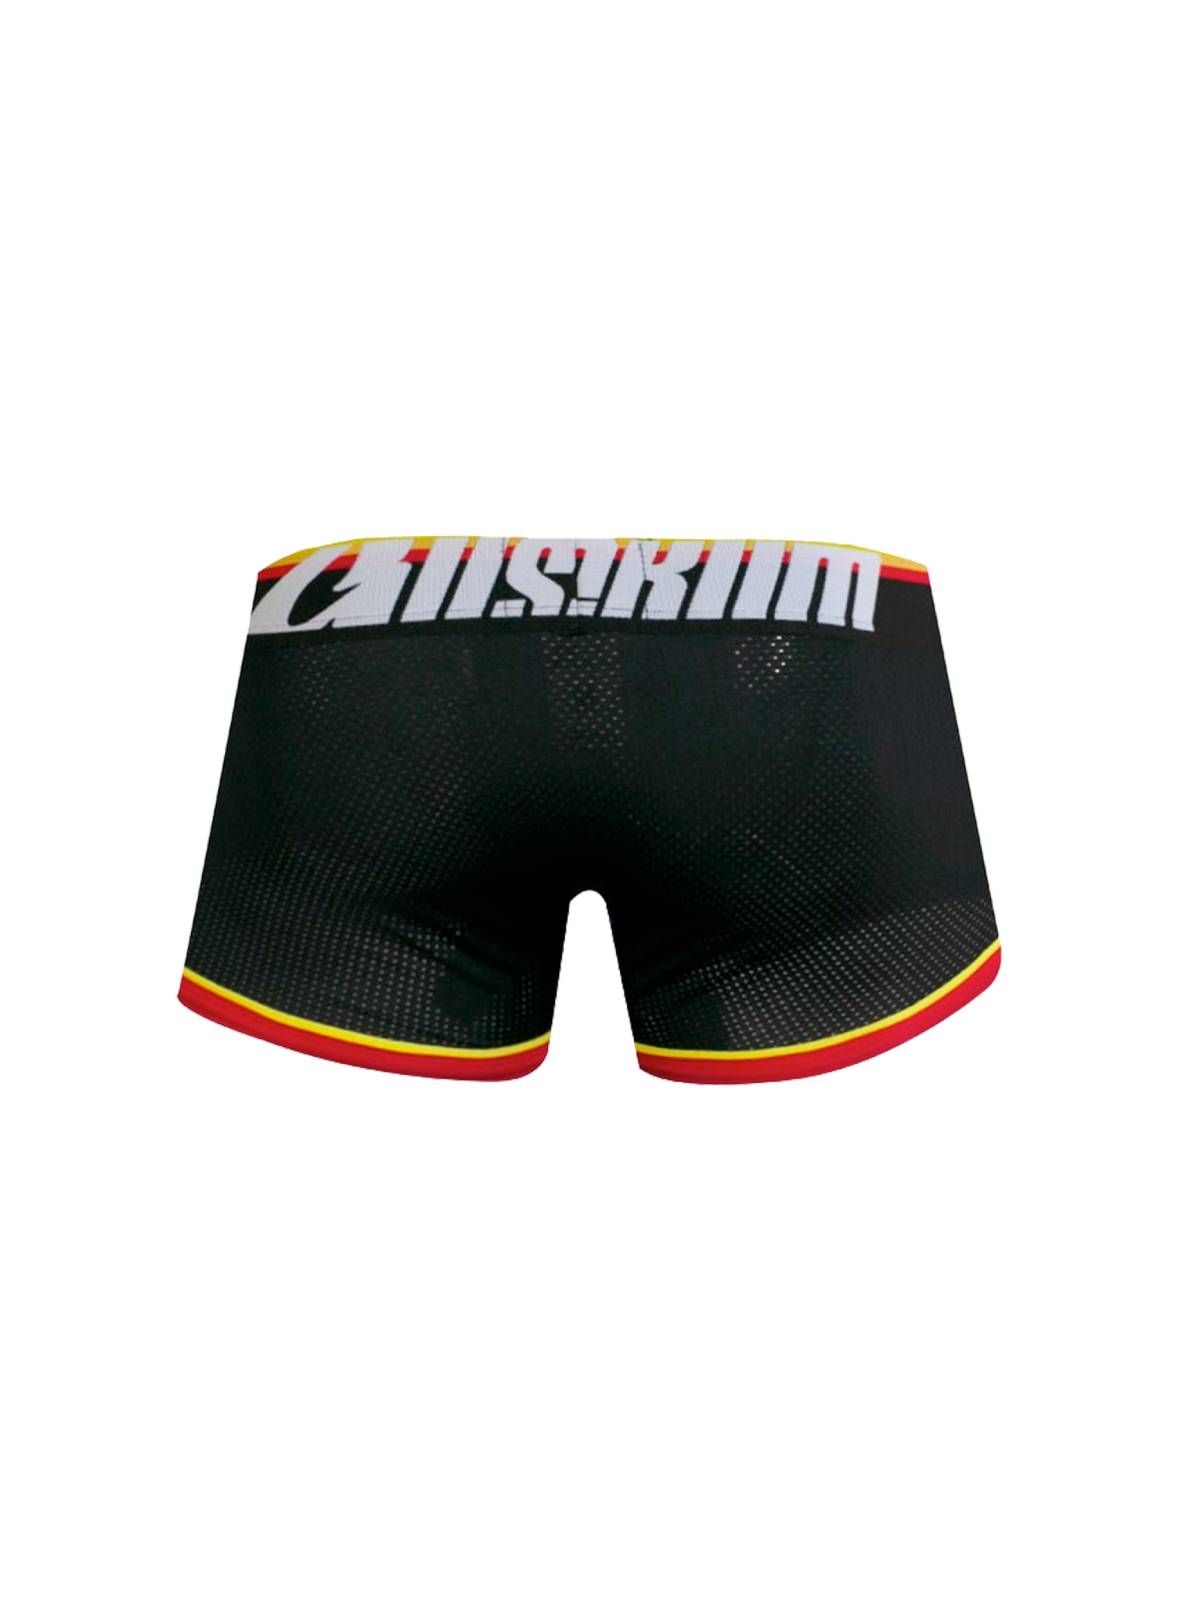 Aussiebum Hipster KnockOut | Red/Black